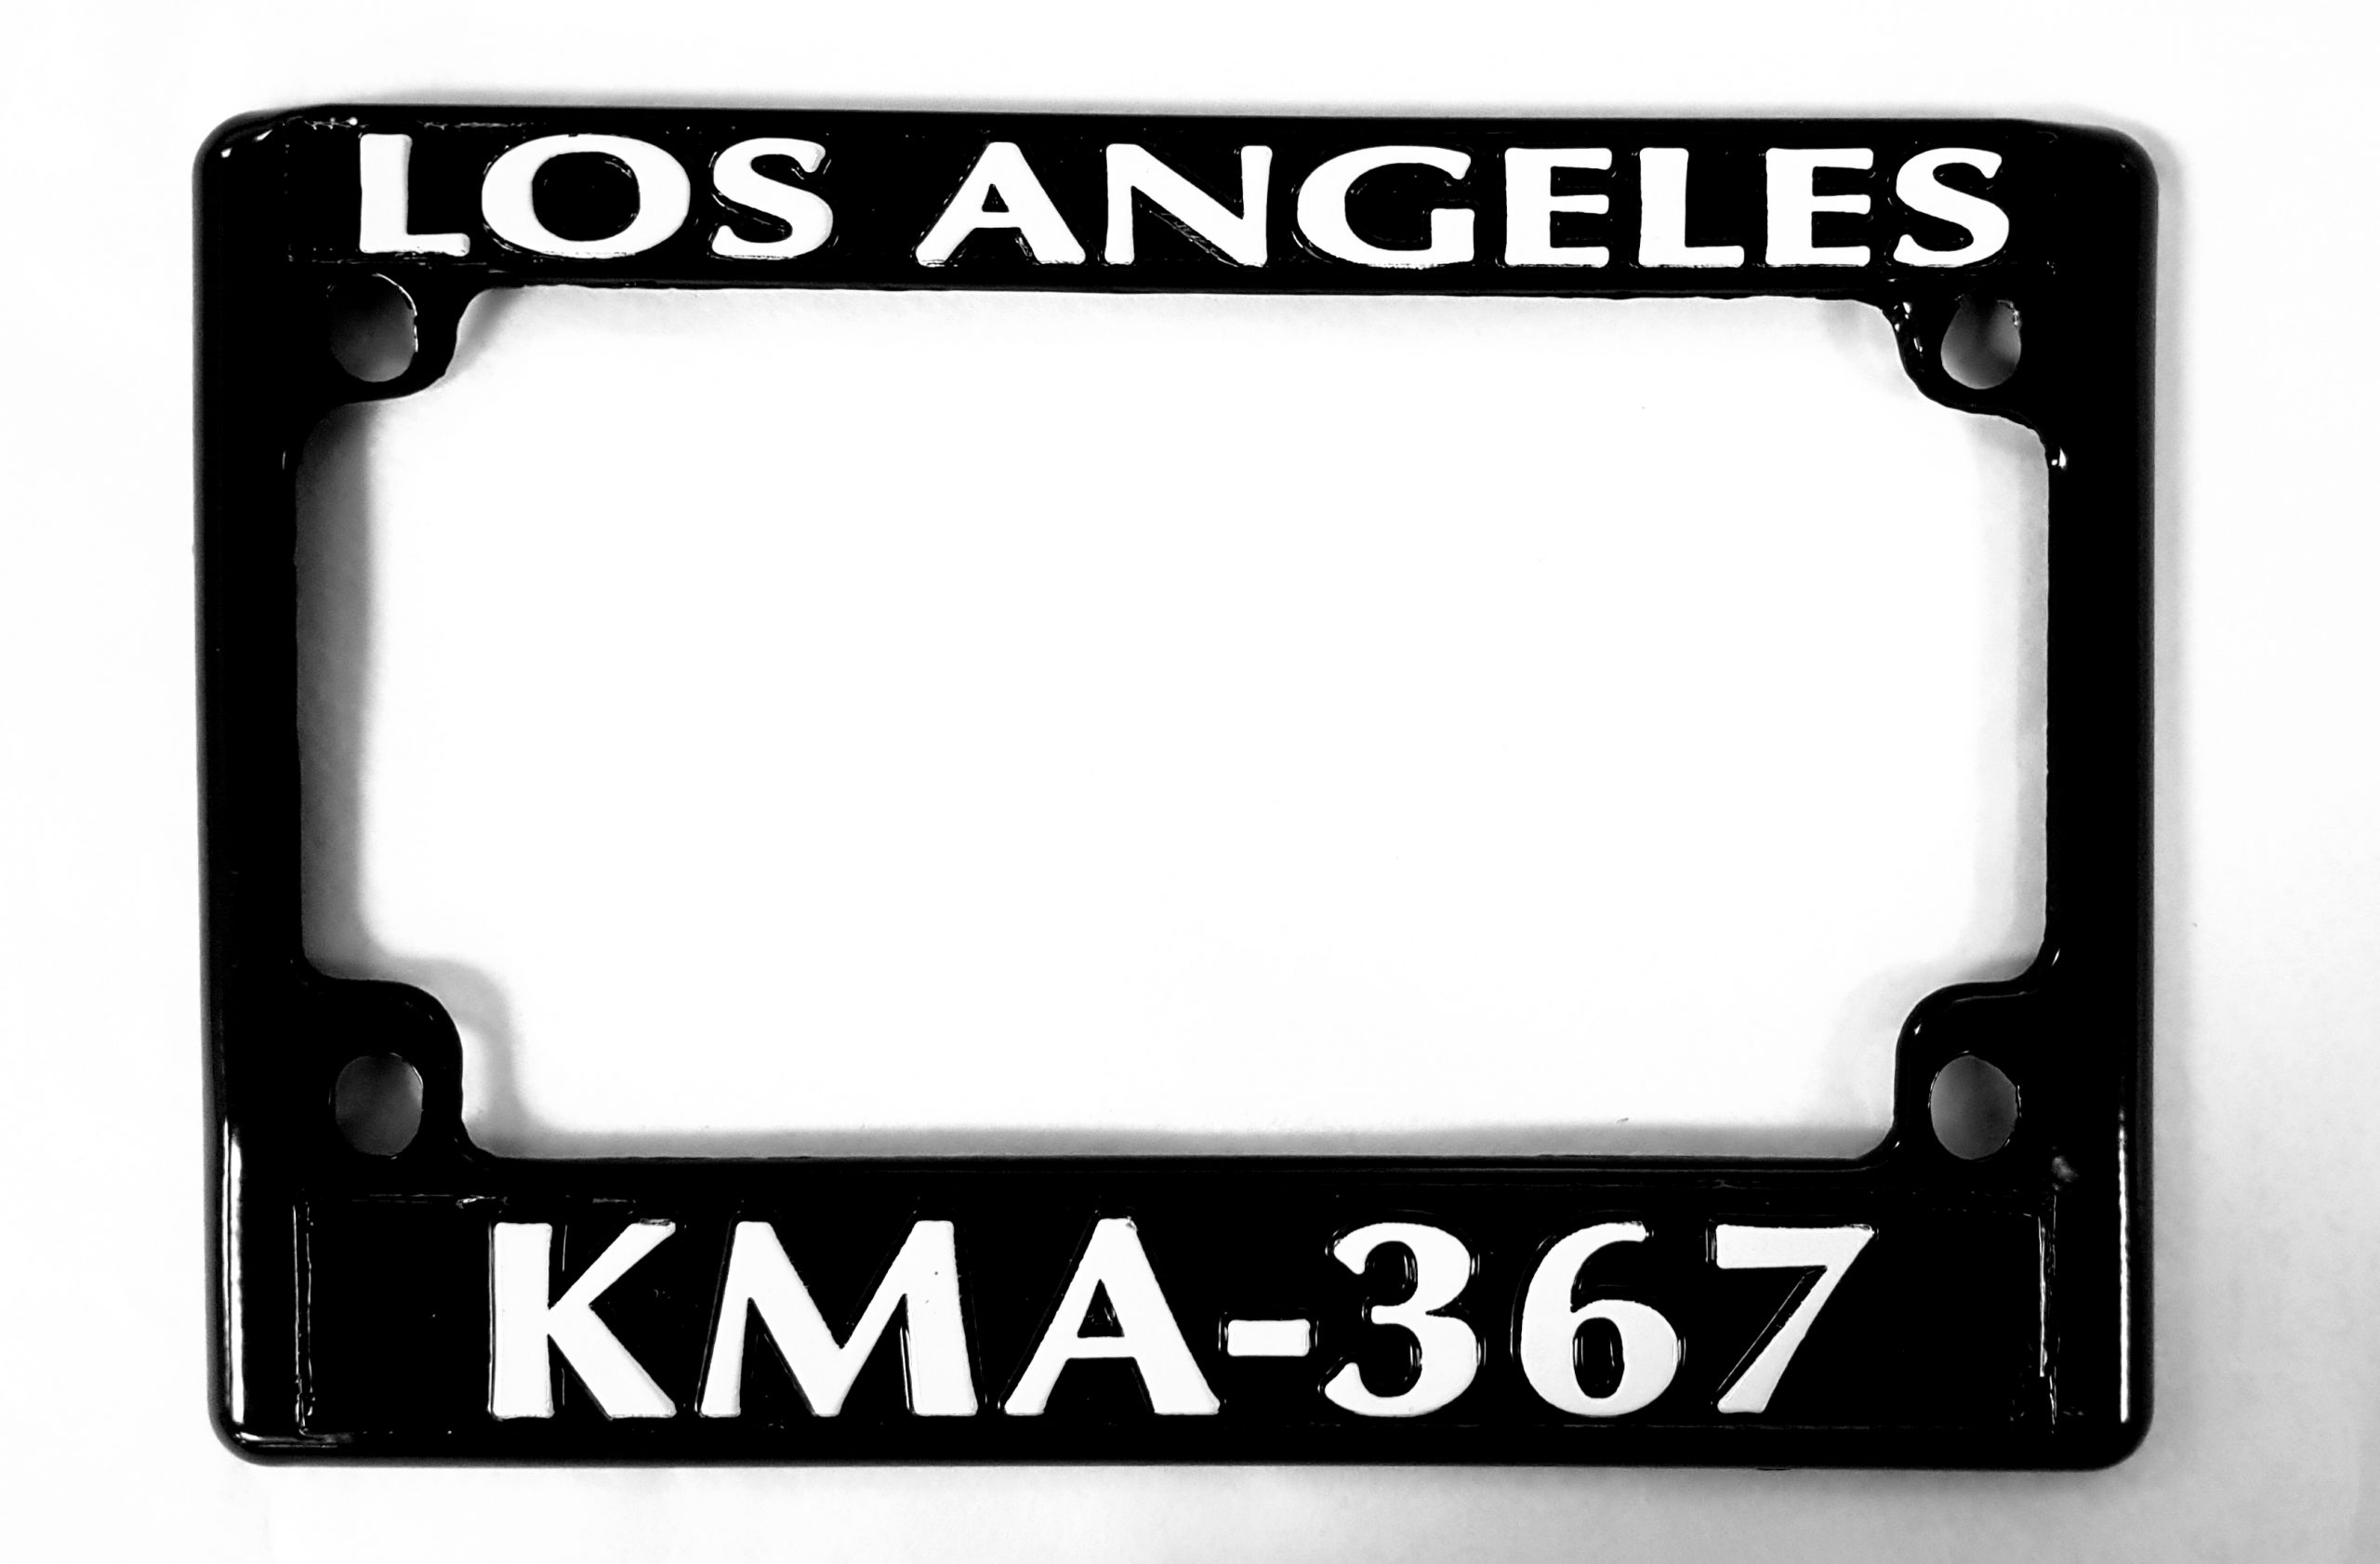 BLACK Metal LOS ANGELES PD KMA-367 MOTORCYCLE LICENSE PLATE FRAME New.